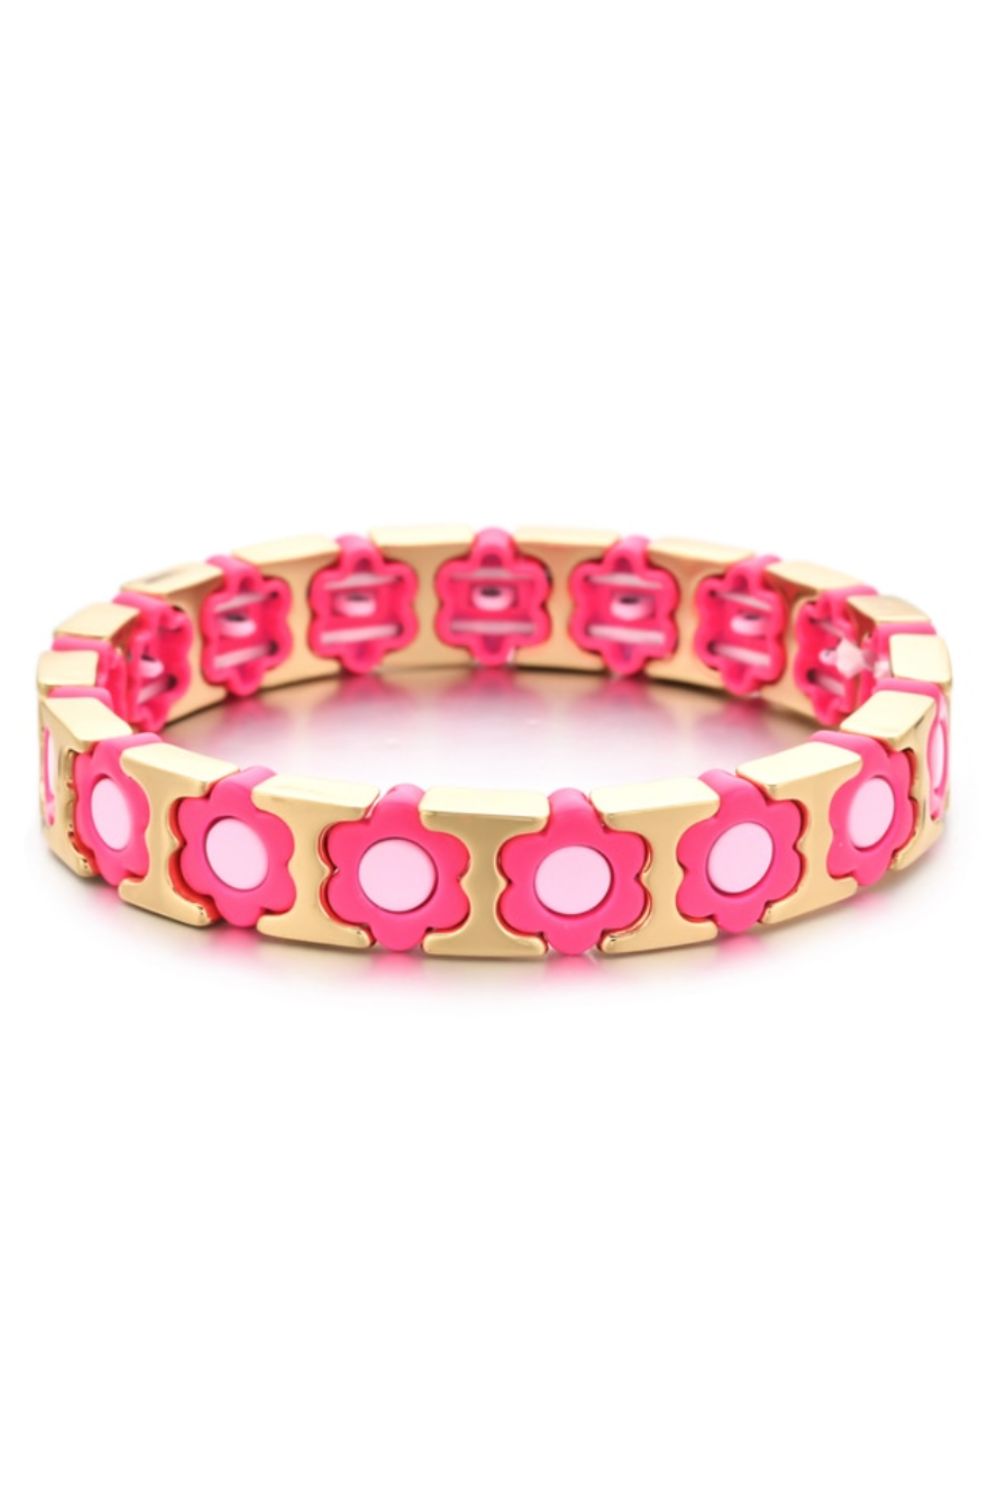 Daisy chain bracelet - hot pink/pale pink/gold